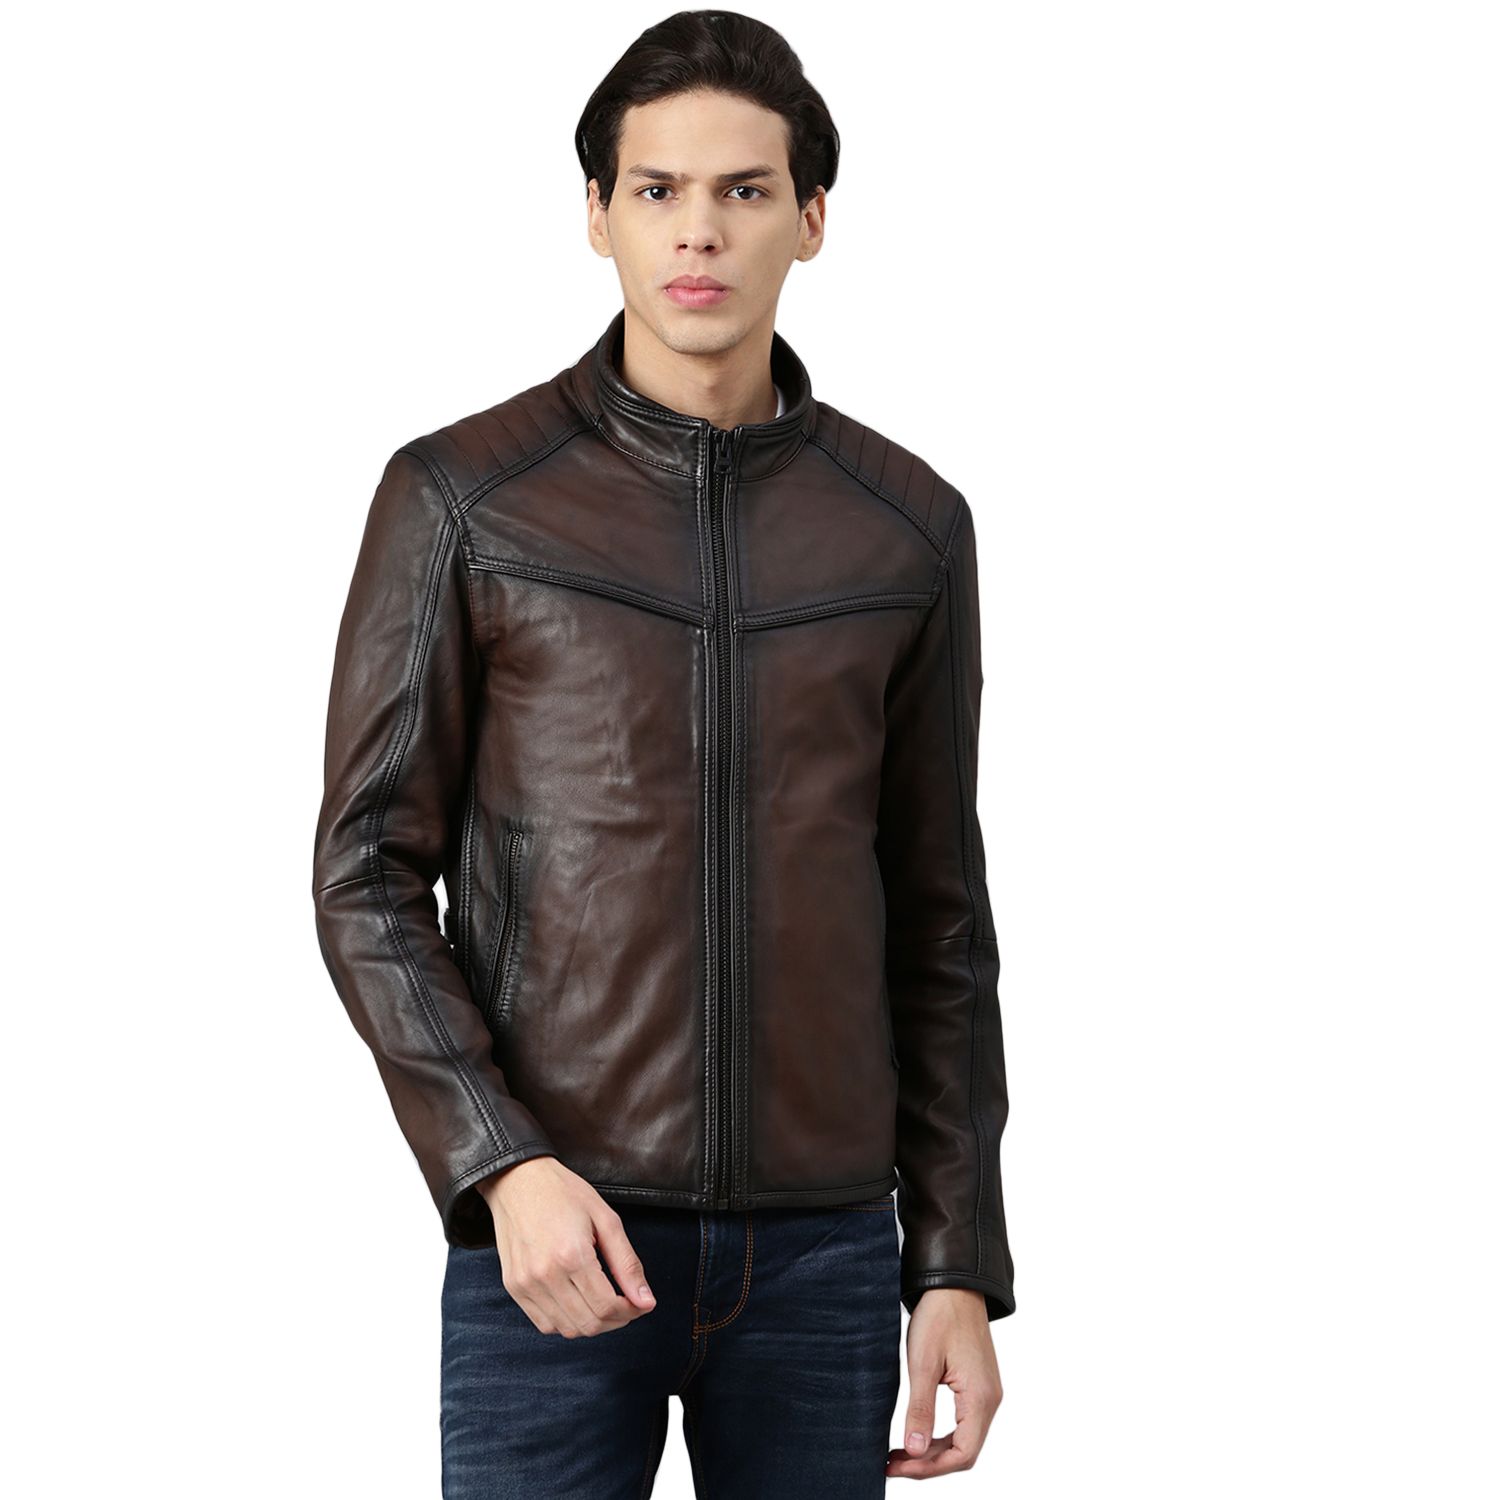 Fashionable woodland mens leather jacket For Comfort And Style - Alibaba.com-gemektower.com.vn